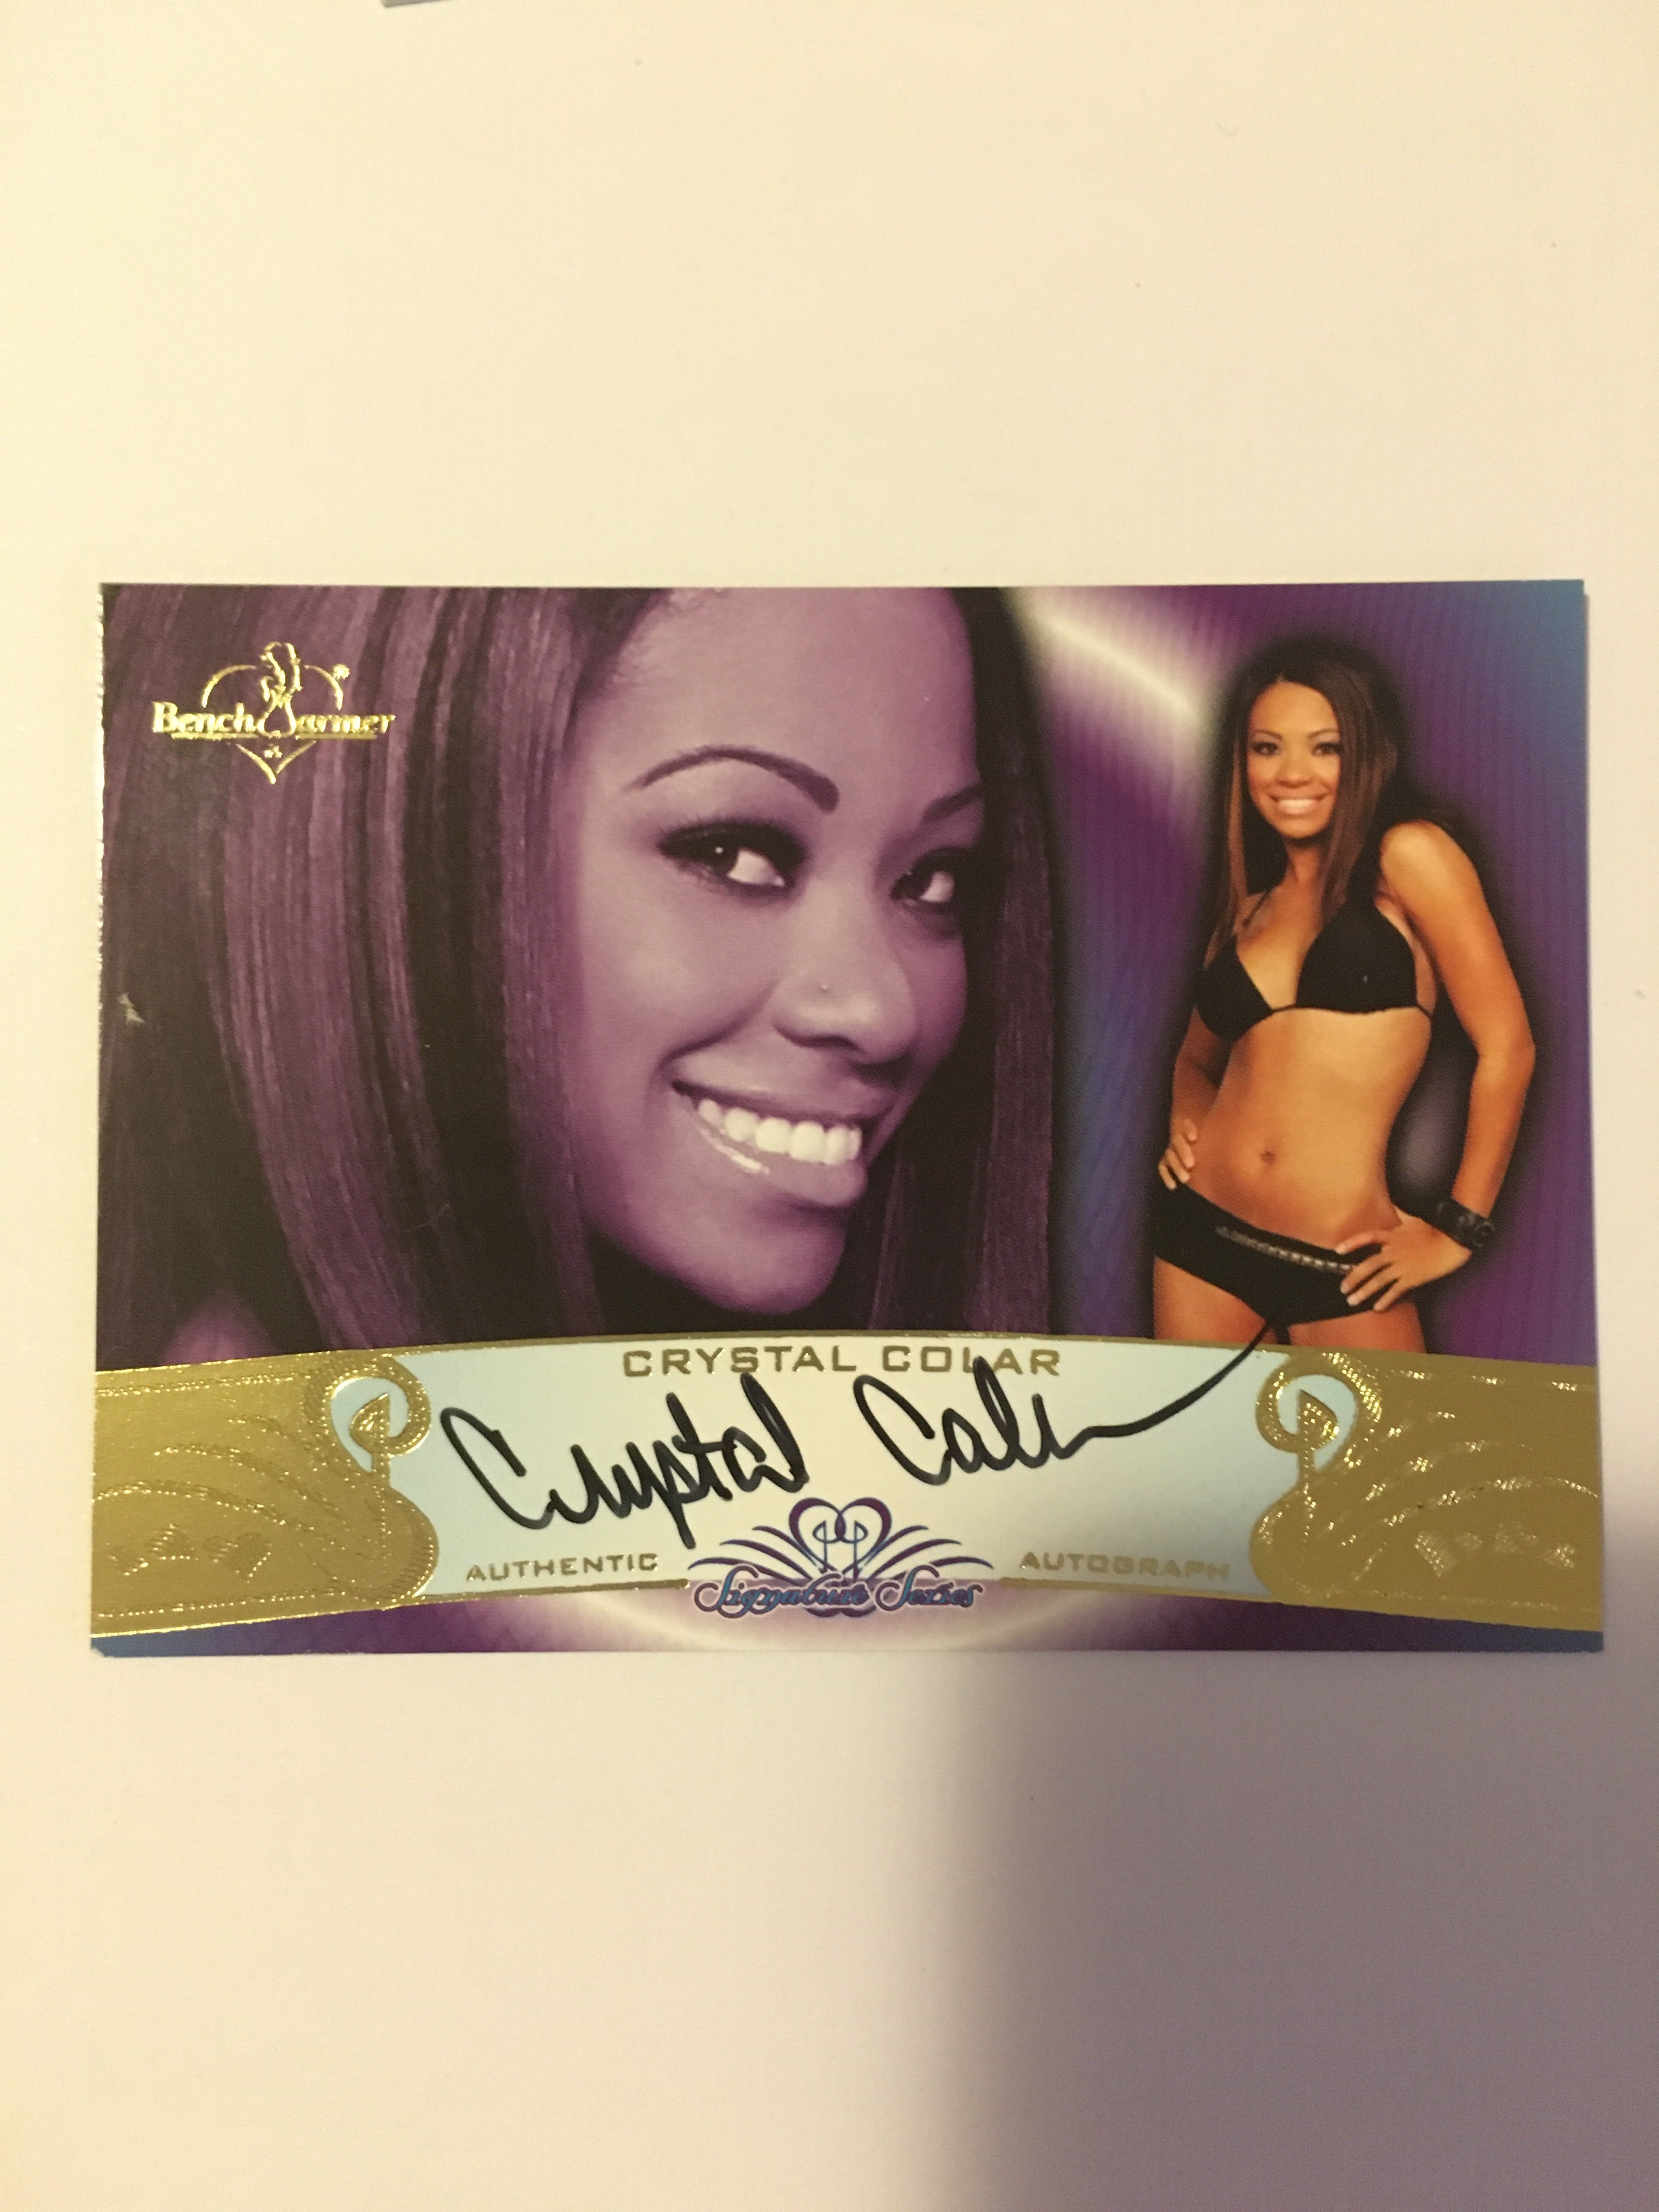 Crystal Colar - Autographed Benchwarmer Trading Card (1)